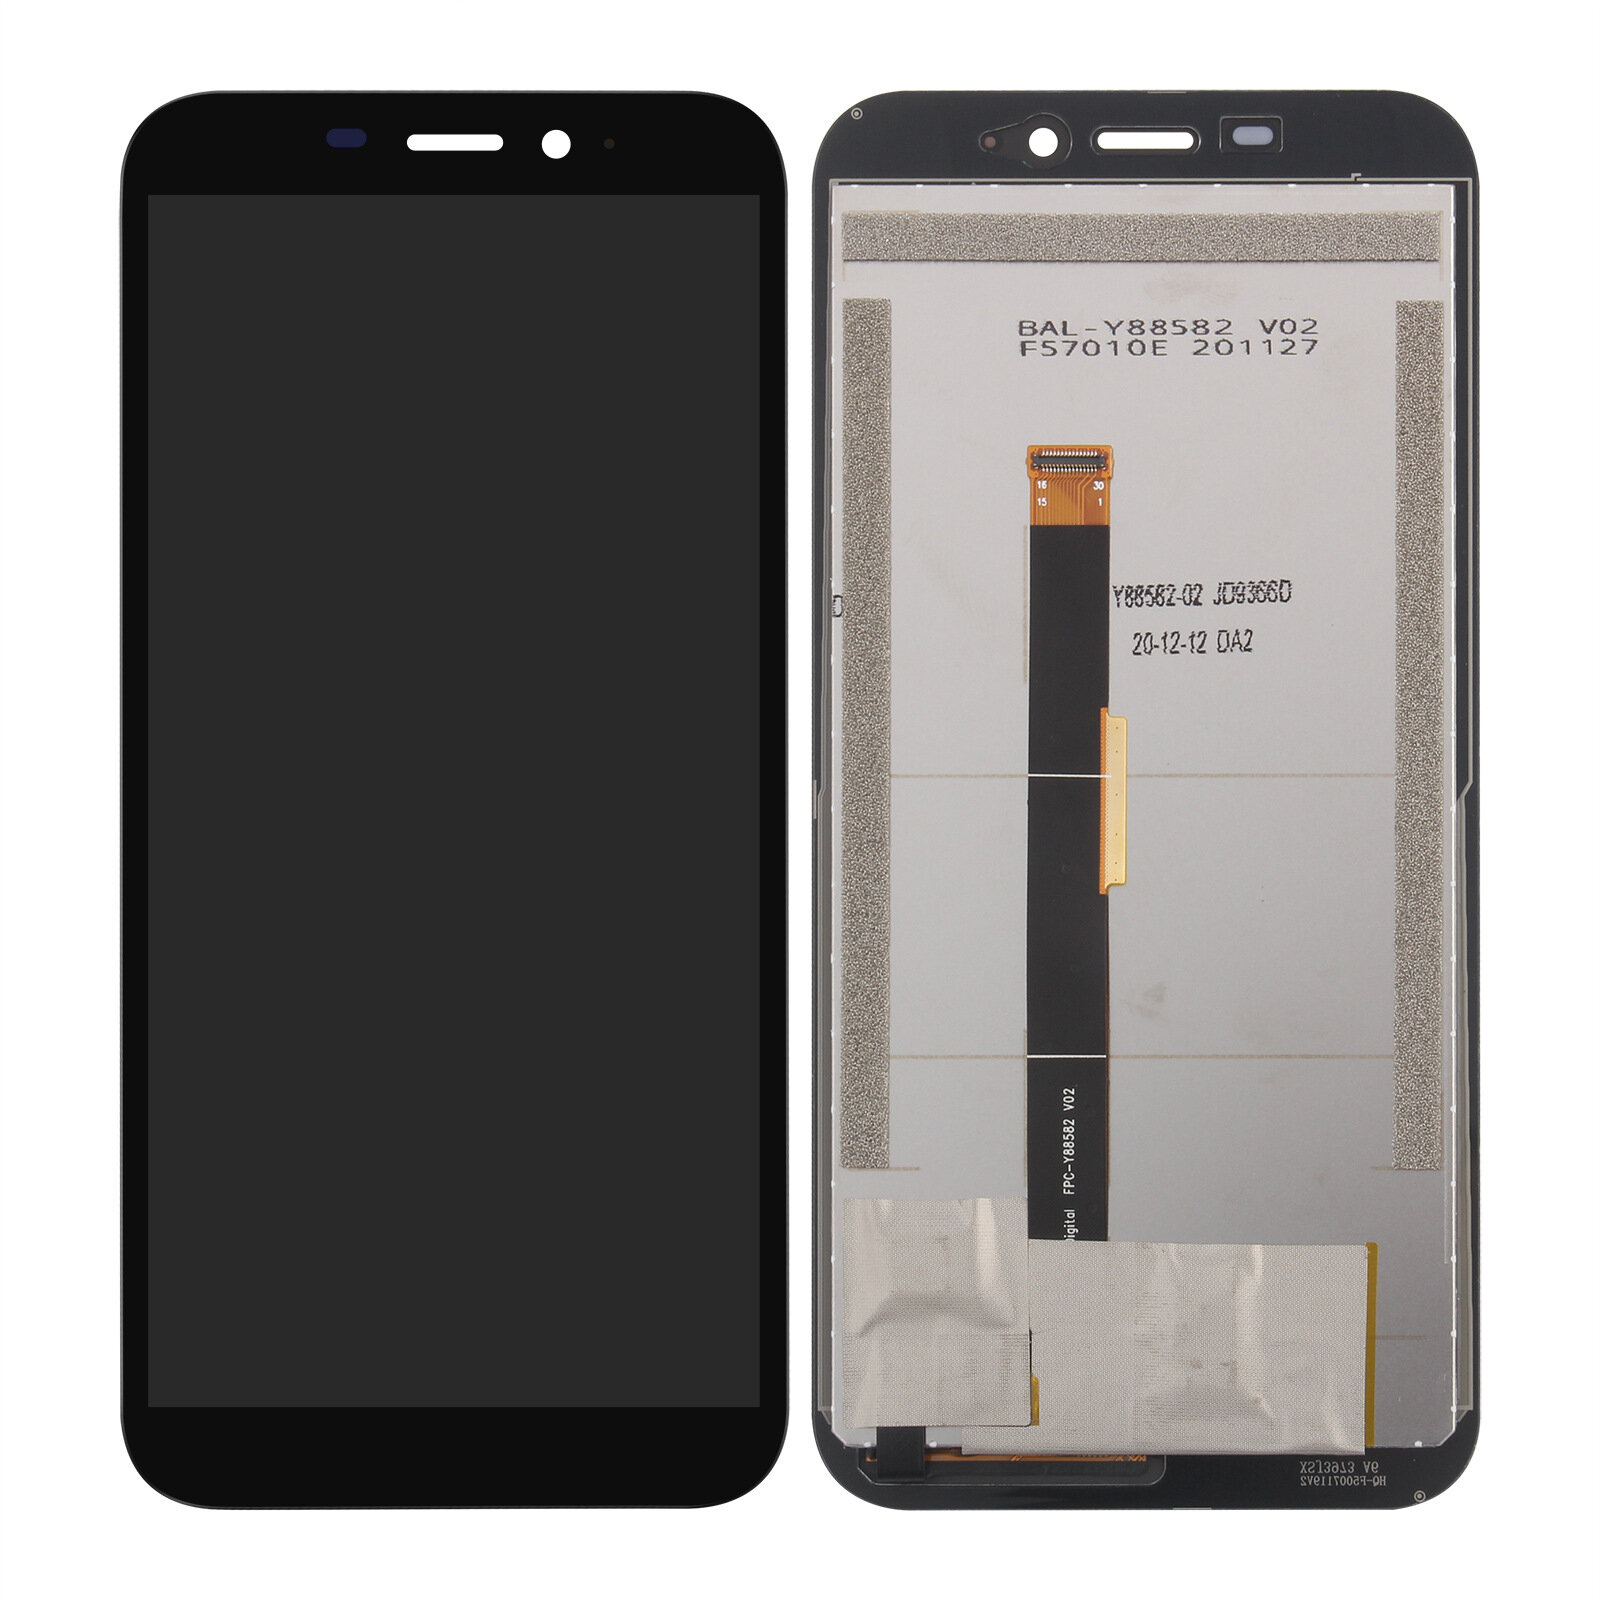 

Bakeey for UleFone Armor X8 TFT Display + Touch Screen Digitizer Assembly Replacement Parts with Tools